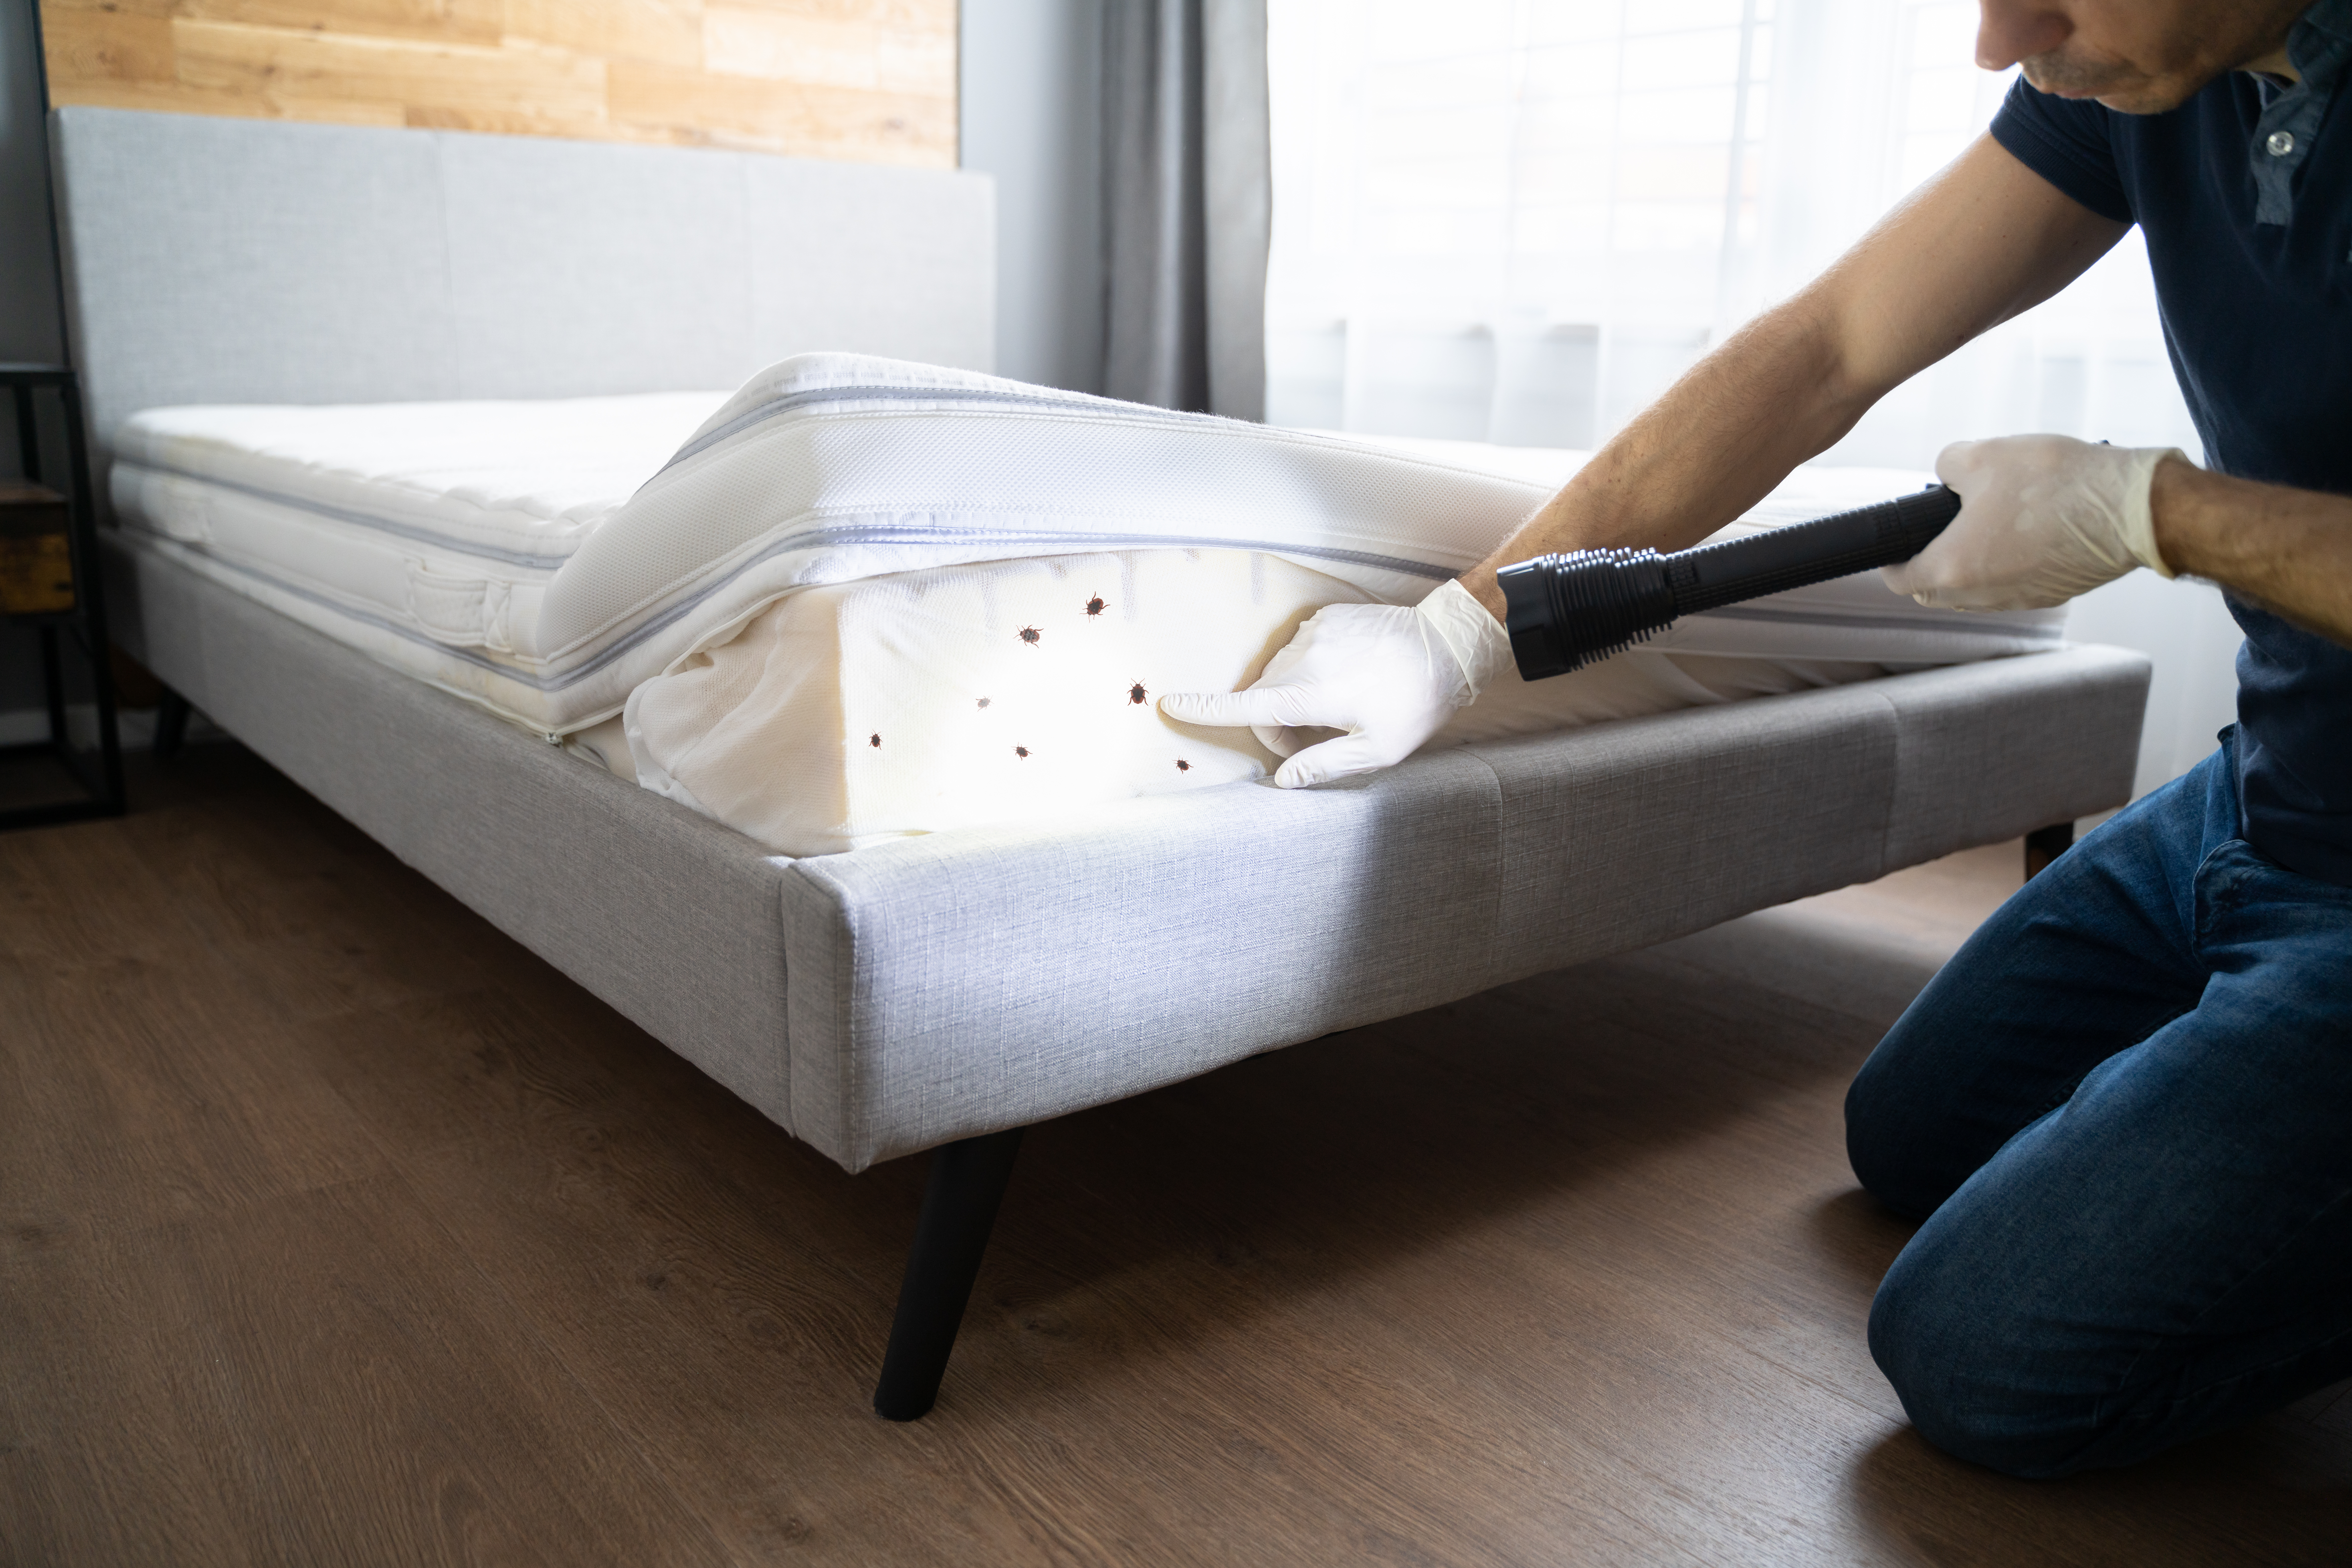 Pest control expert inspecting a mattress - unmatched attention to detail. Just as pests can't escape a professional's eye, ensure potential leads don't bypass your online presence.